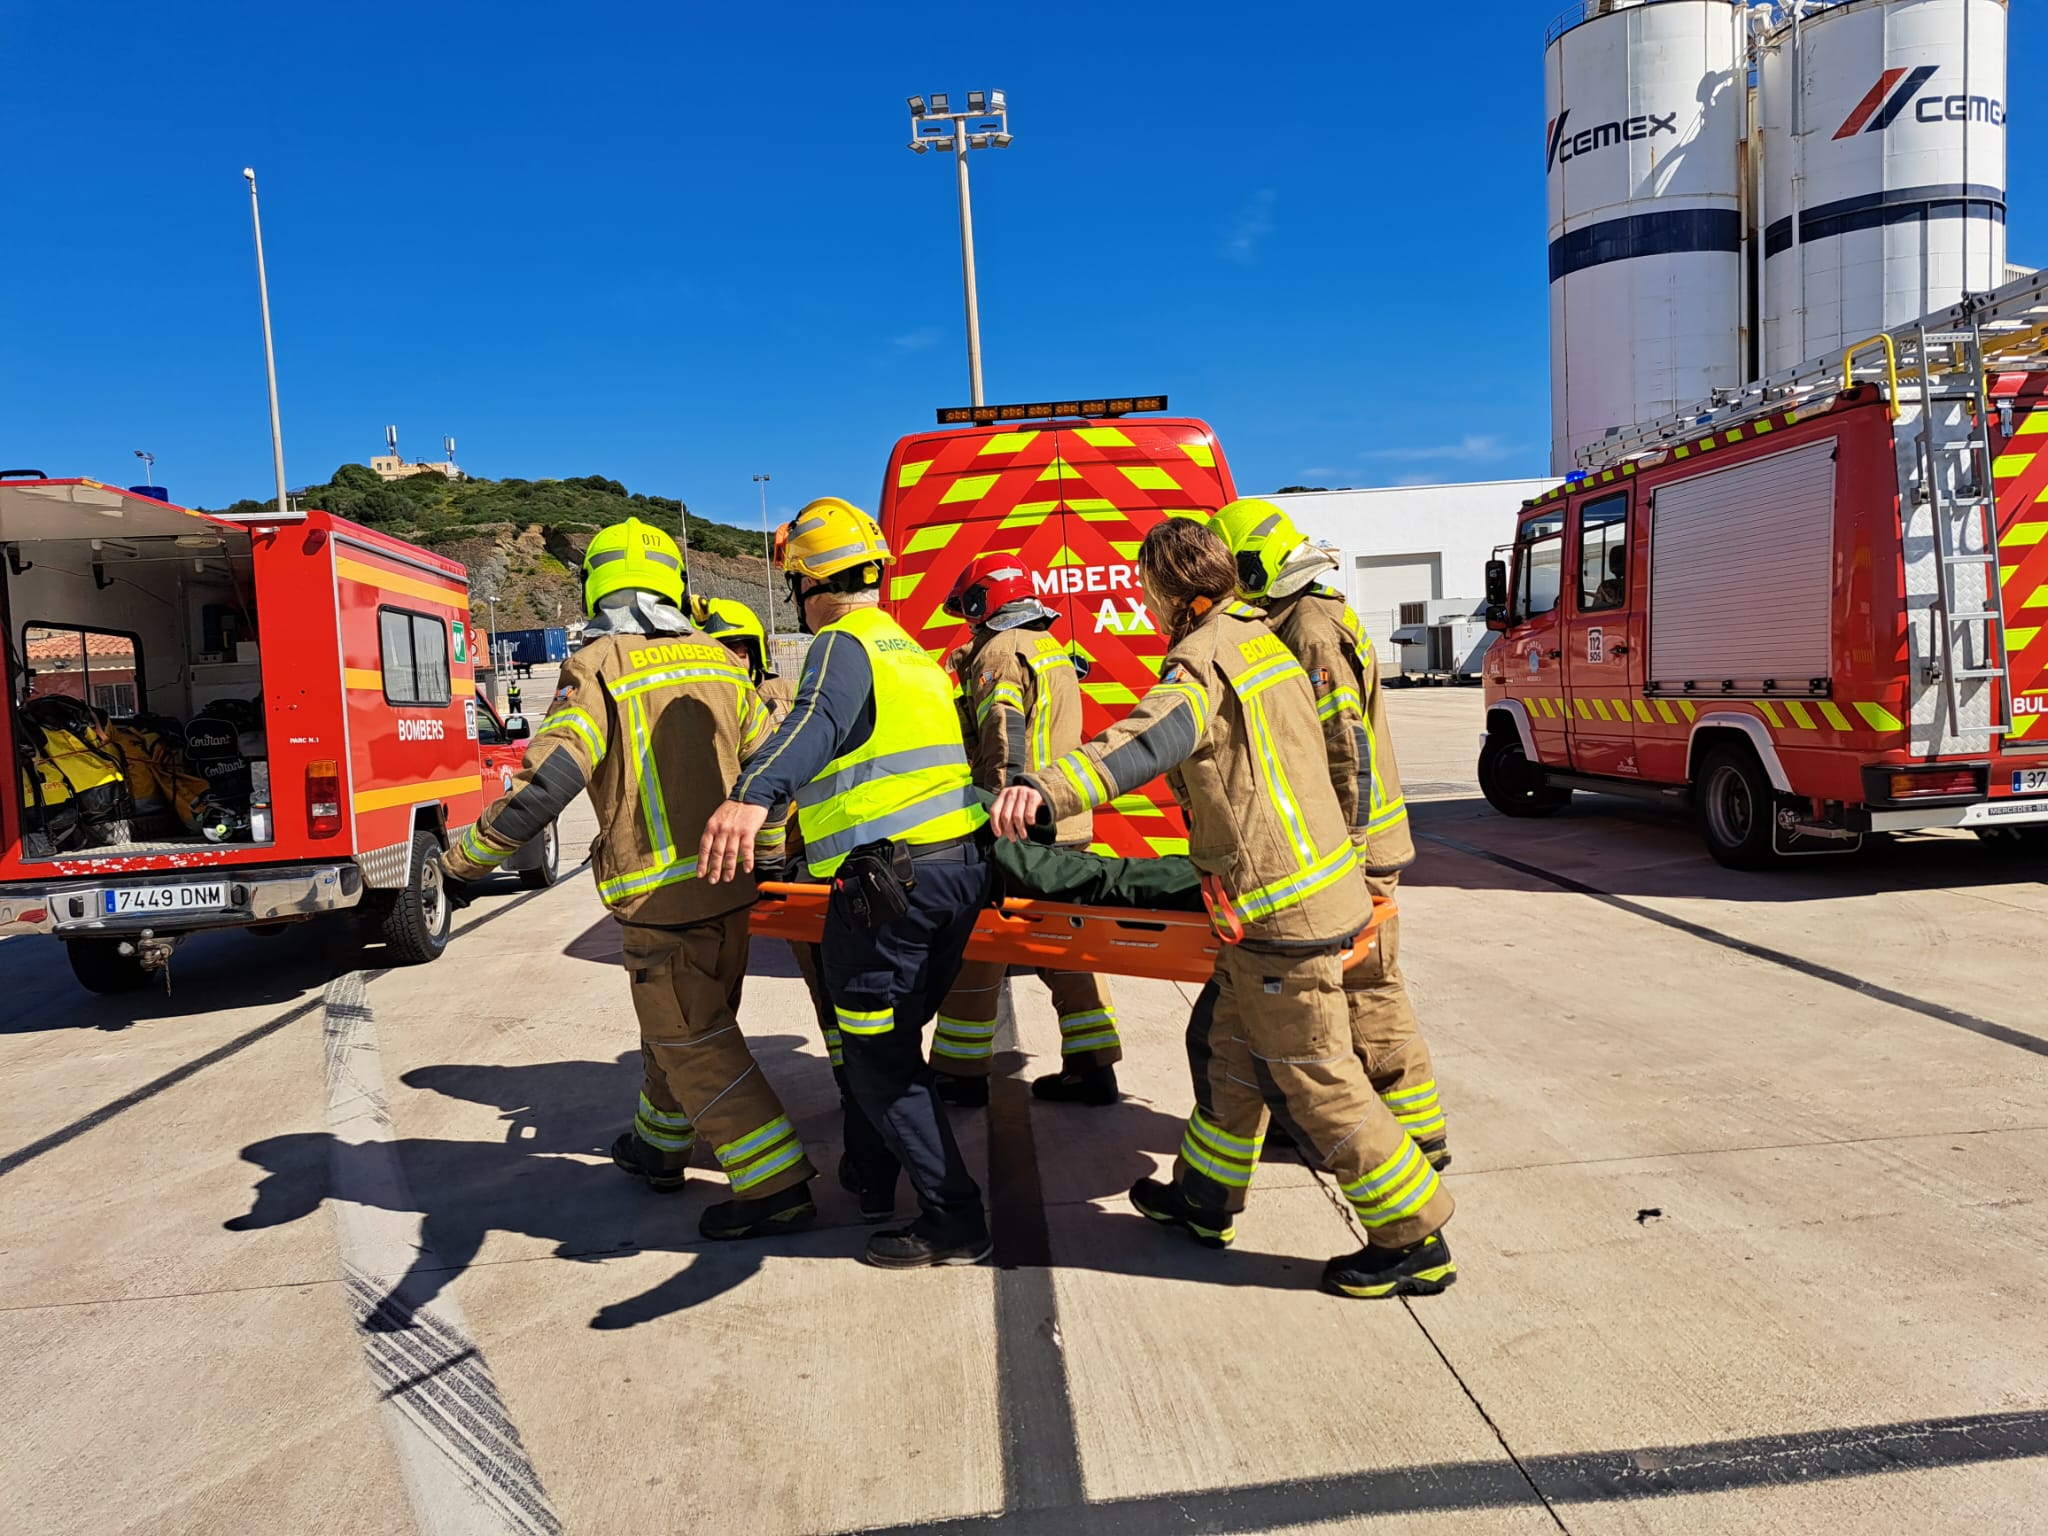 Firefighters from the Consell Insular de Menorca and the Port Authority of the Balearic Islands take part in a terrorist attack drill inside a ship docked in the port of Maó